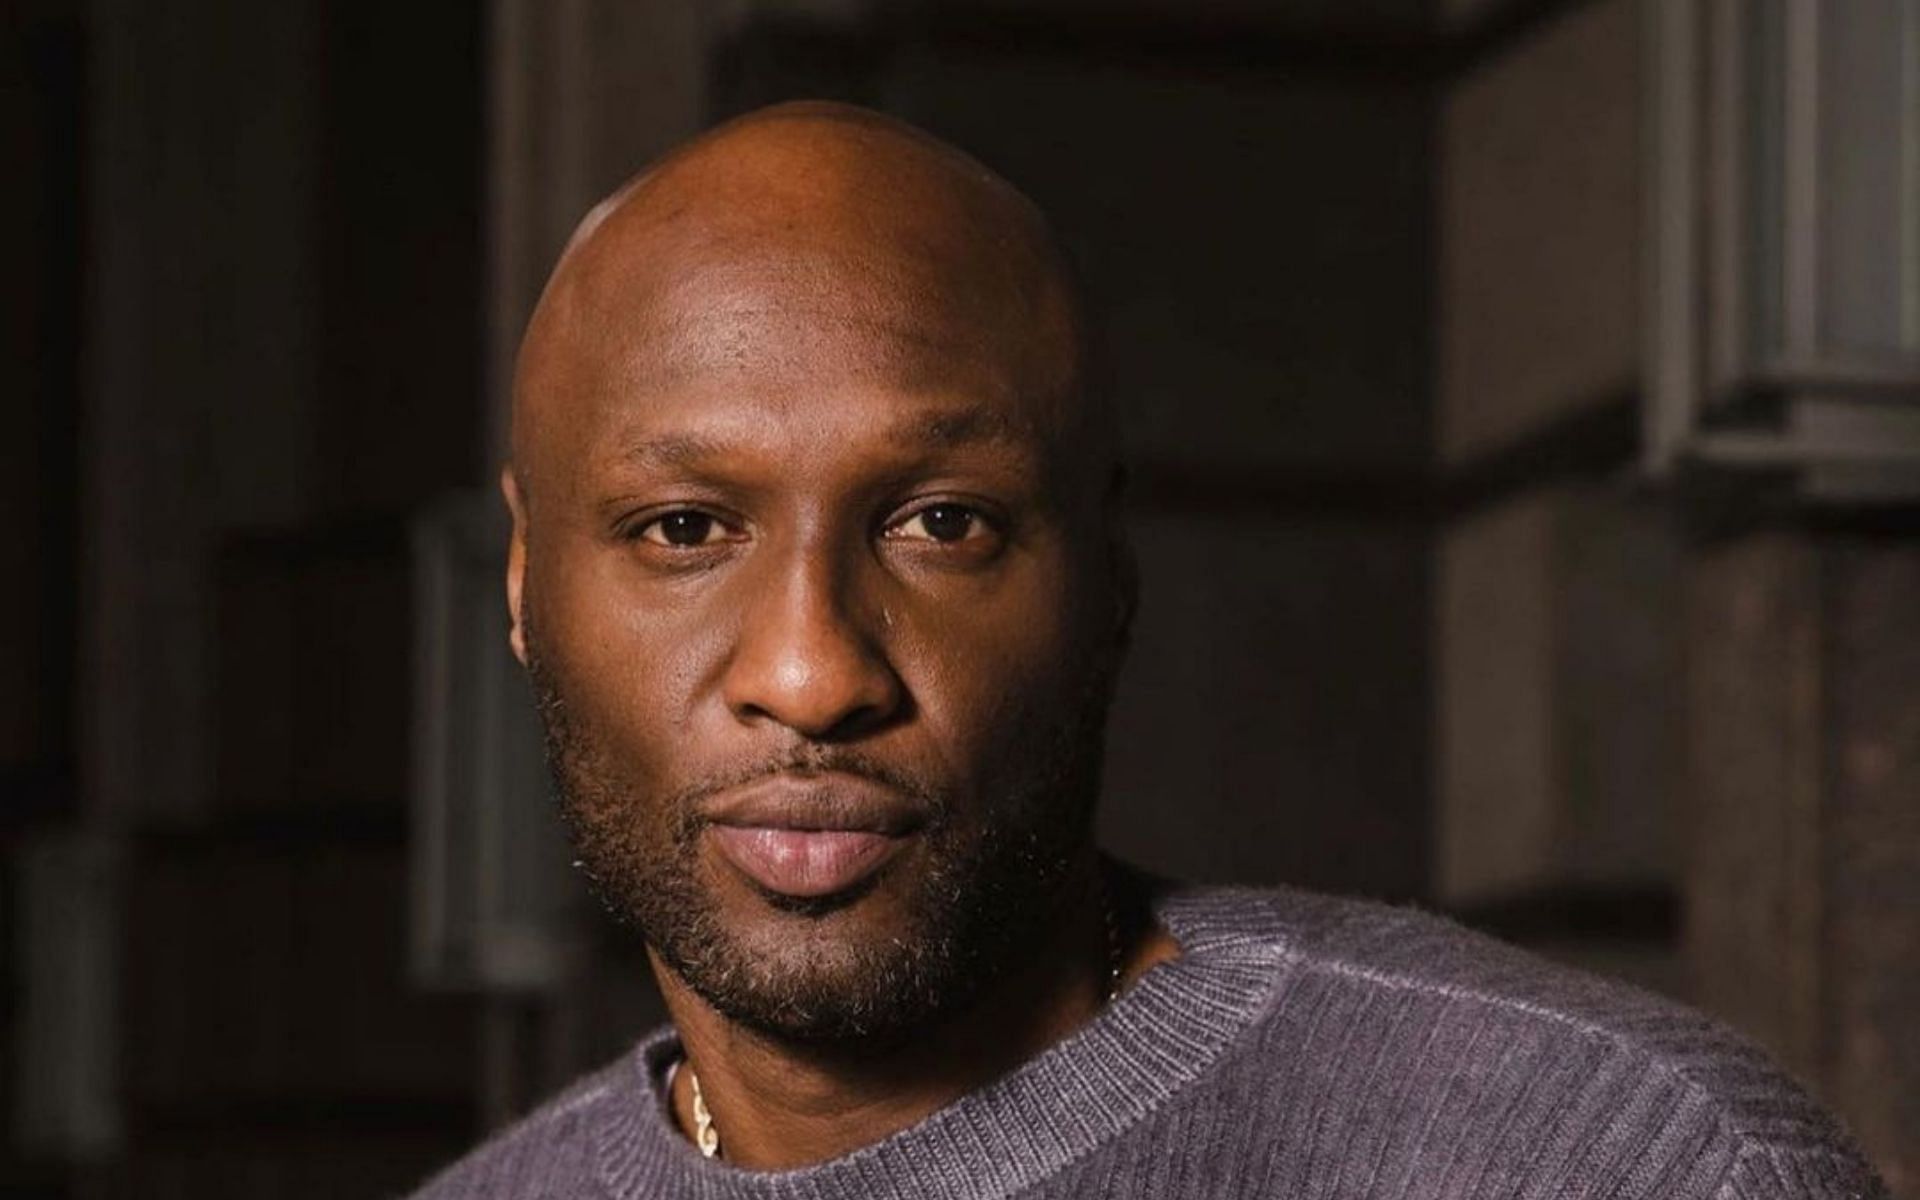 Lamar Odom opened up about the death of his son on Celebrity Big Brother (Image via lamarodom/ Instagram)